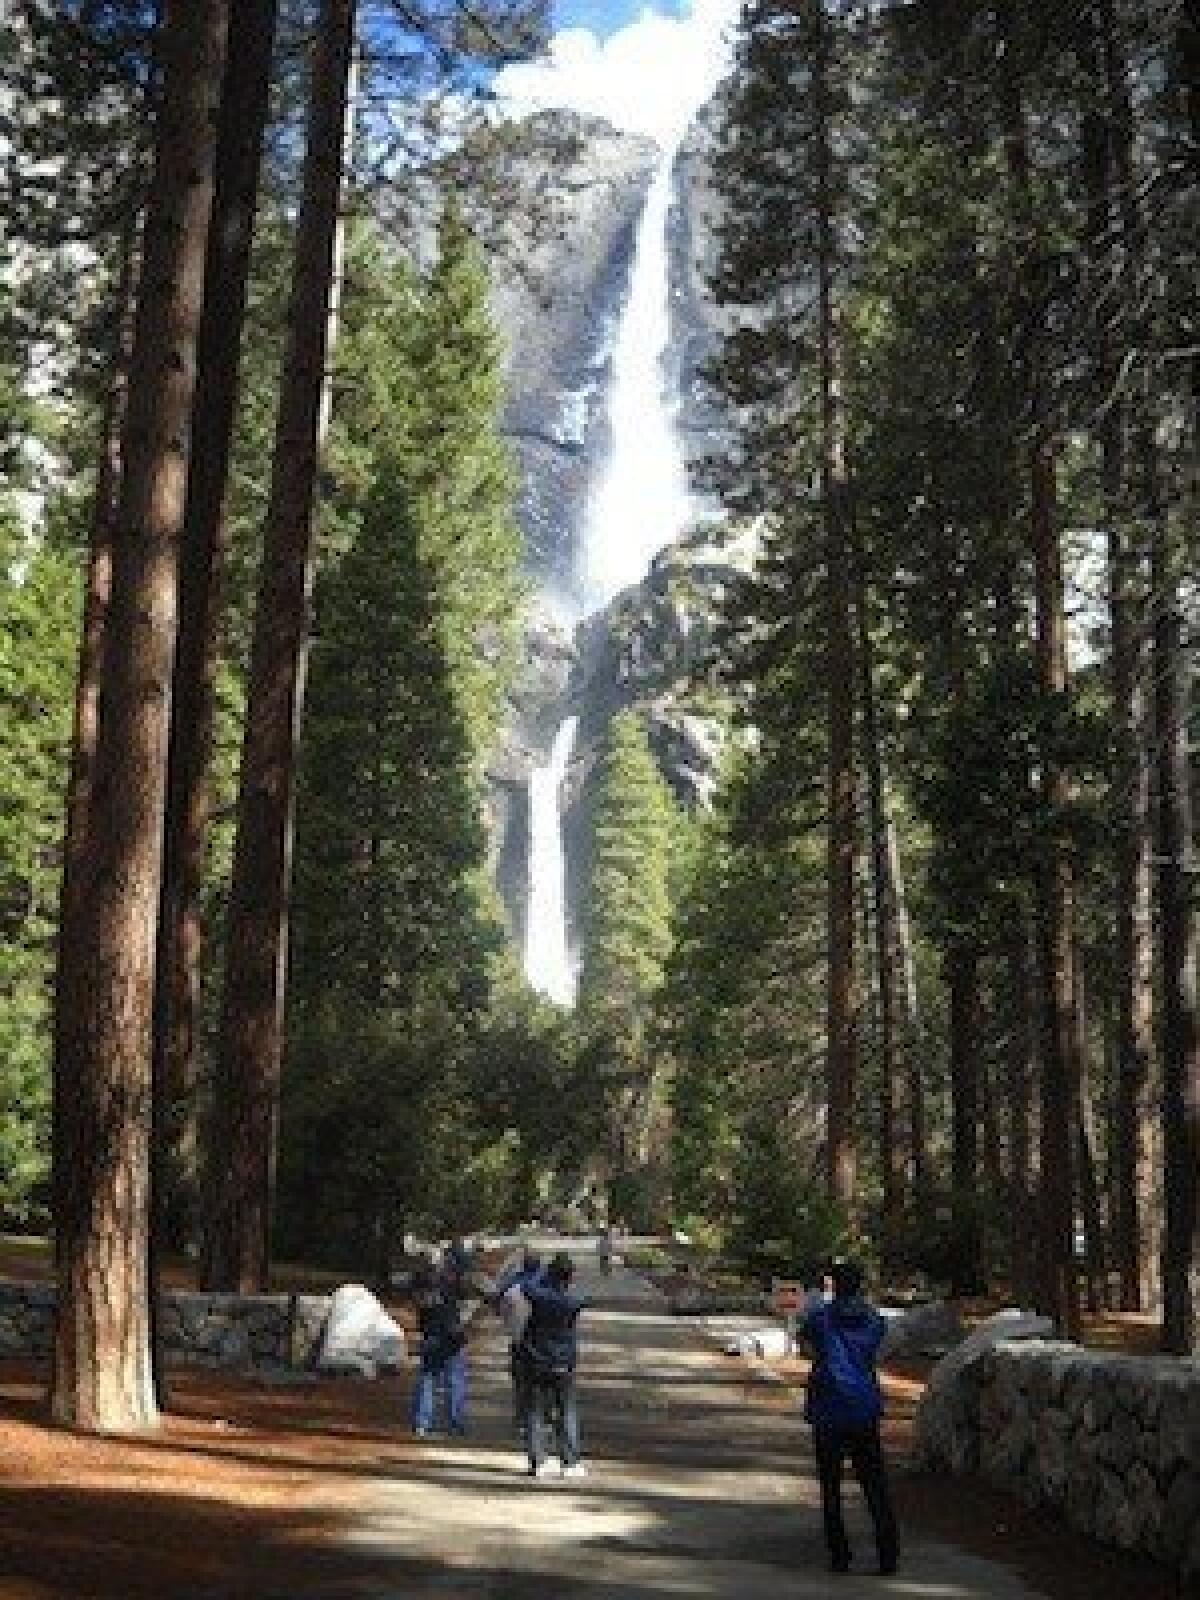 Tourists snap photos of Yosemite Falls last month. Despite the water works, the park is experiencing higher than usual fire danger for this time of year.